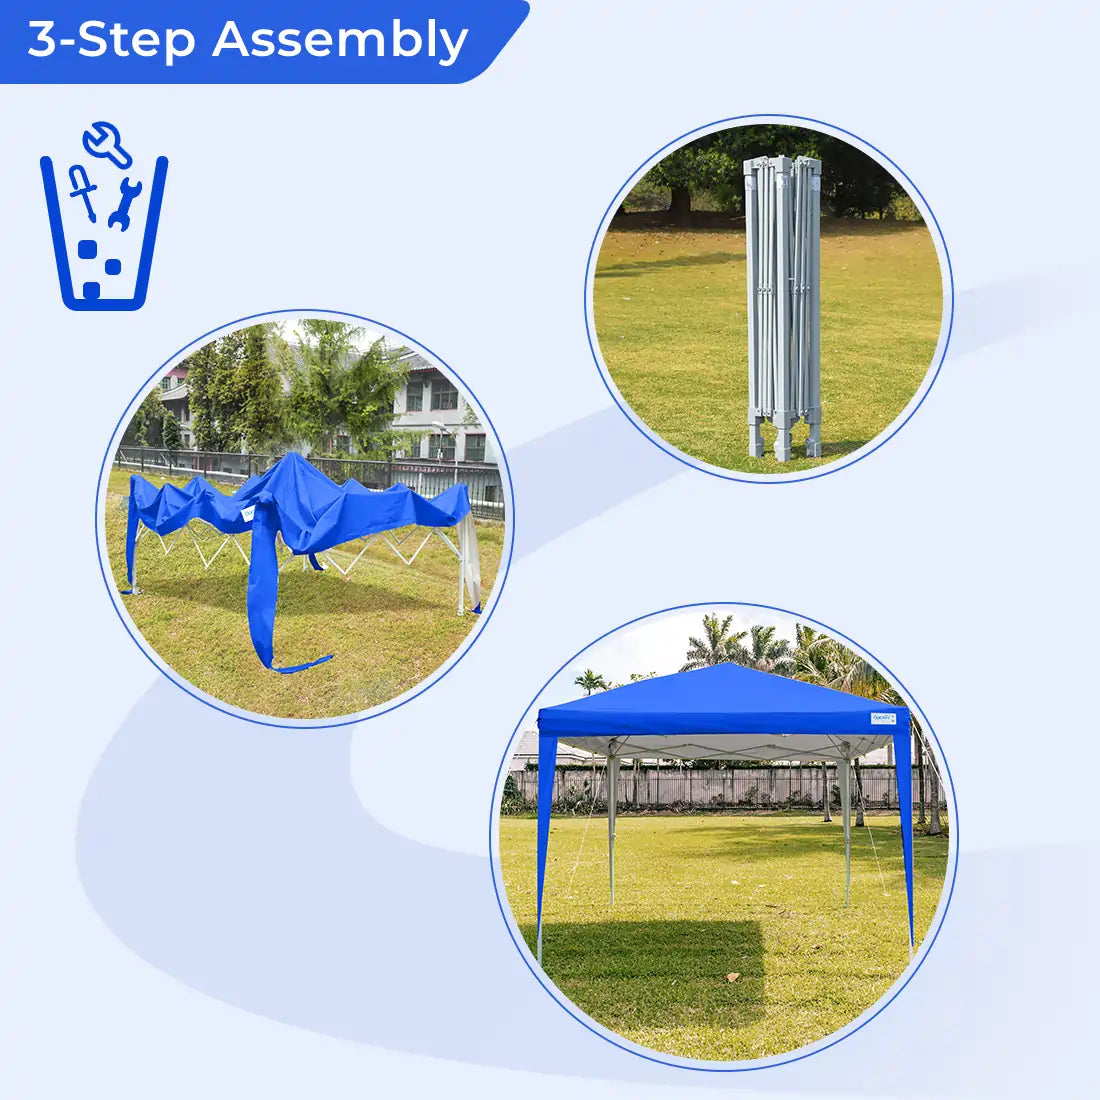 Blue 10x10 canopy without sidewall assembly steps#color_ royal blue